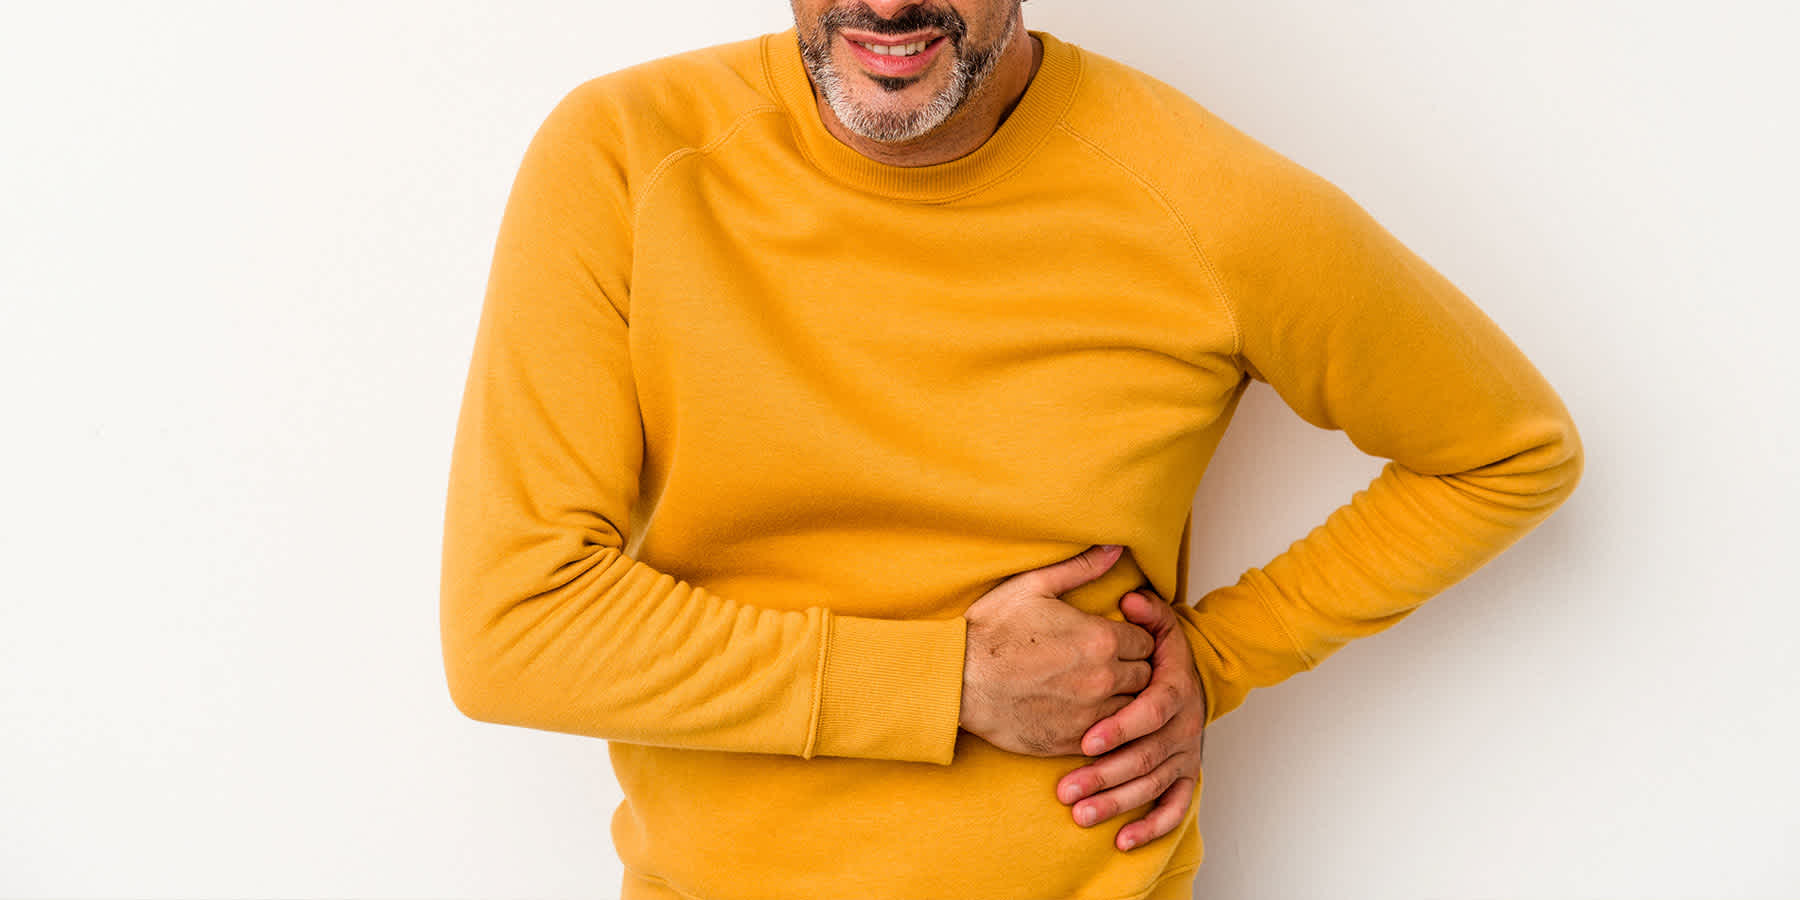 Man with abdominal discomfort wondering about IBS vs. colon cancer